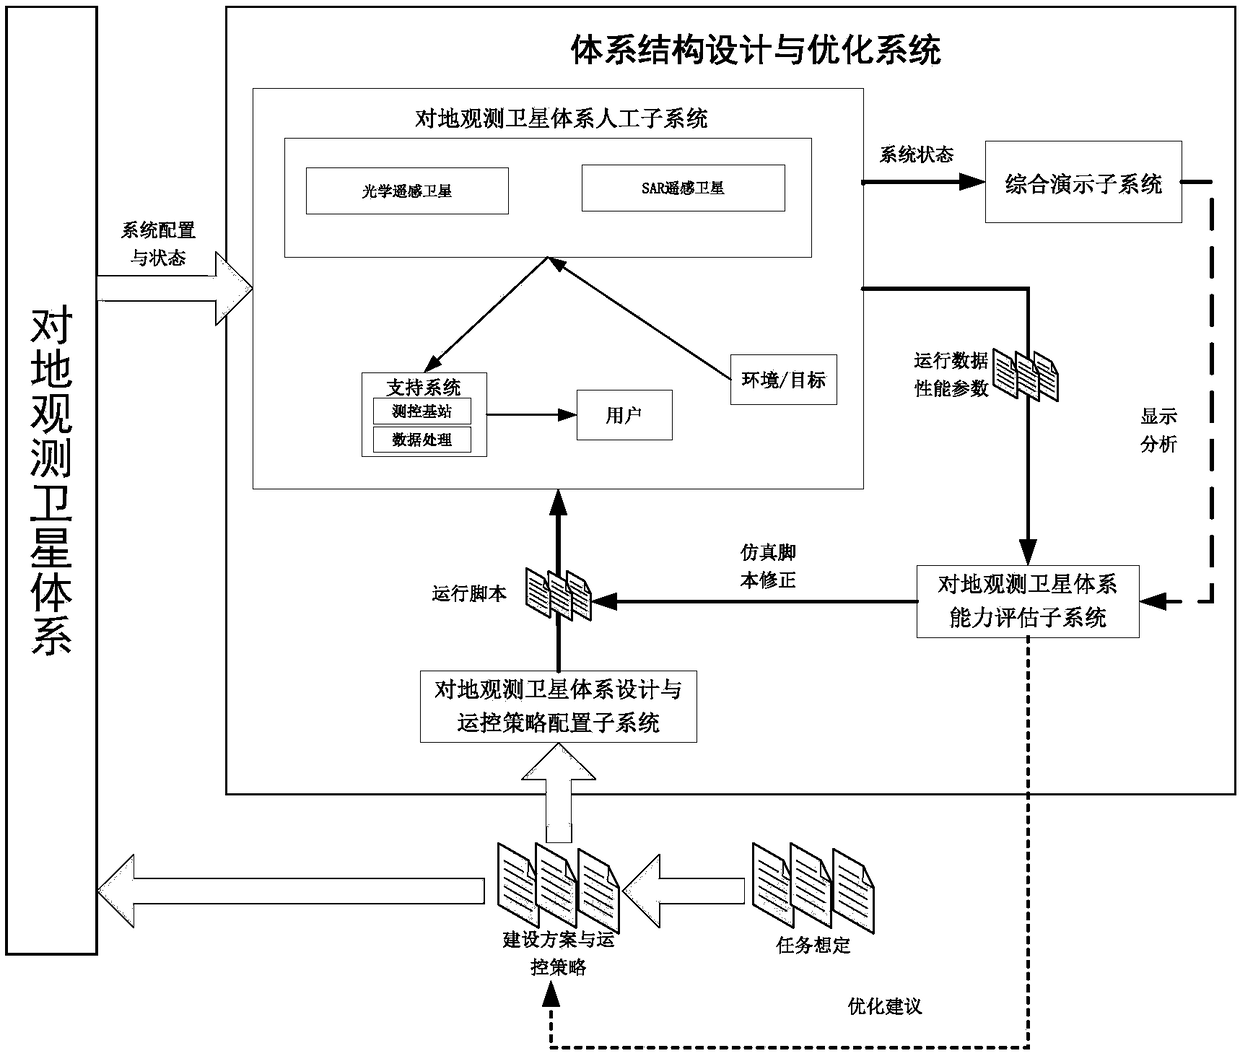 Architecture design and optimization system of earth observation satellite